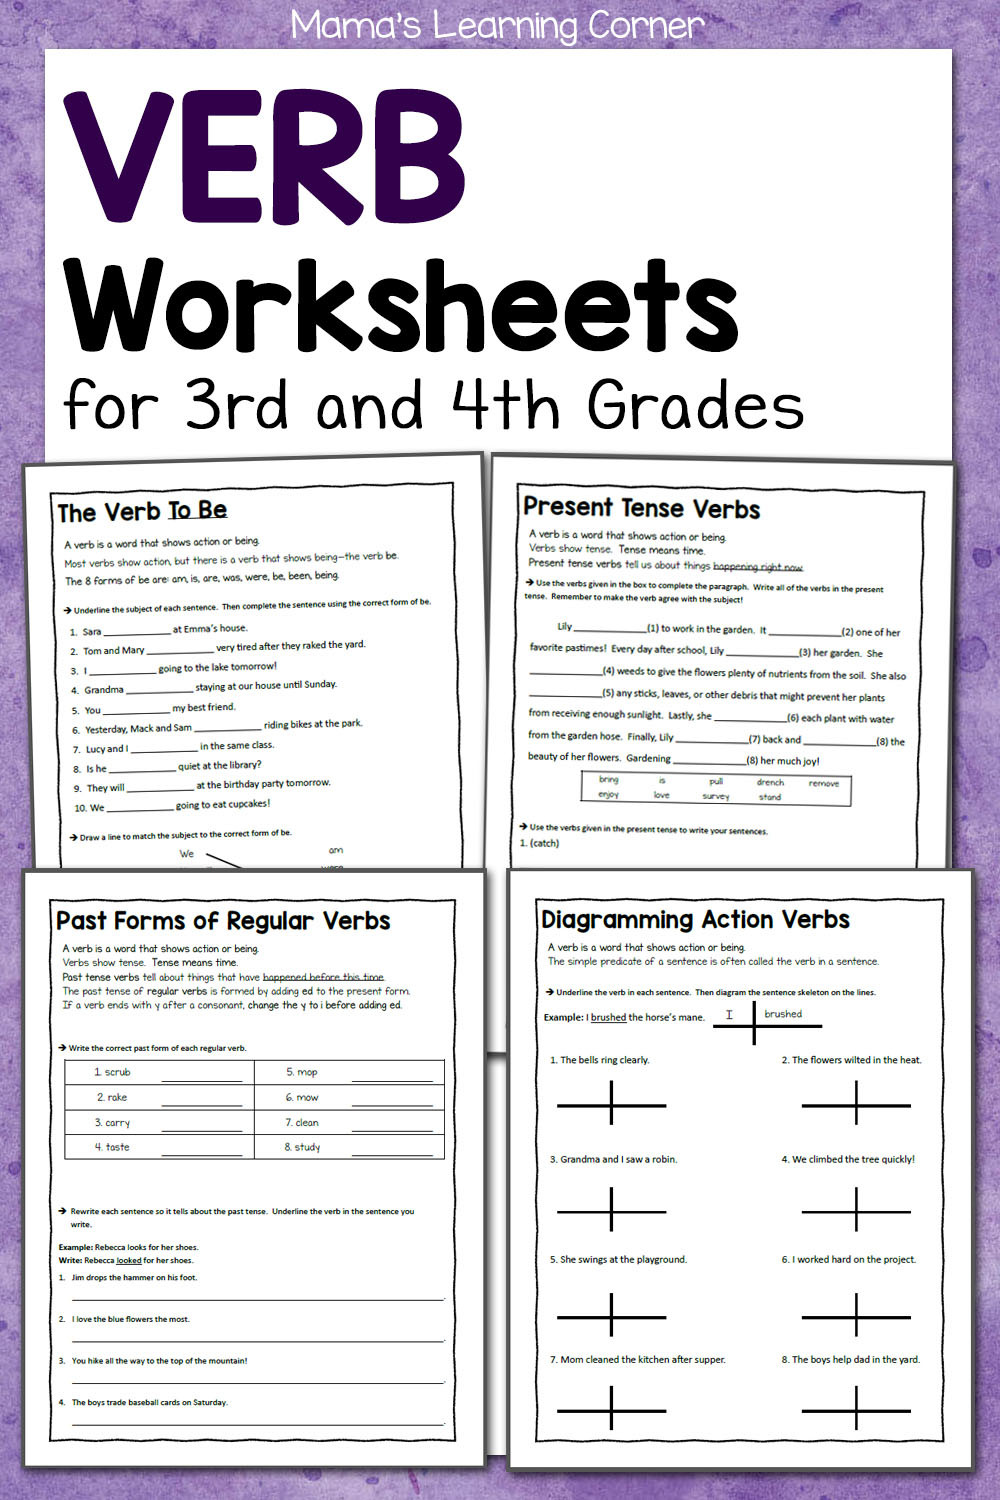 Verb Tense Worksheets 3rd Grade Verb Worksheets for 3rd and 4th Grades Mamas Learning Corner